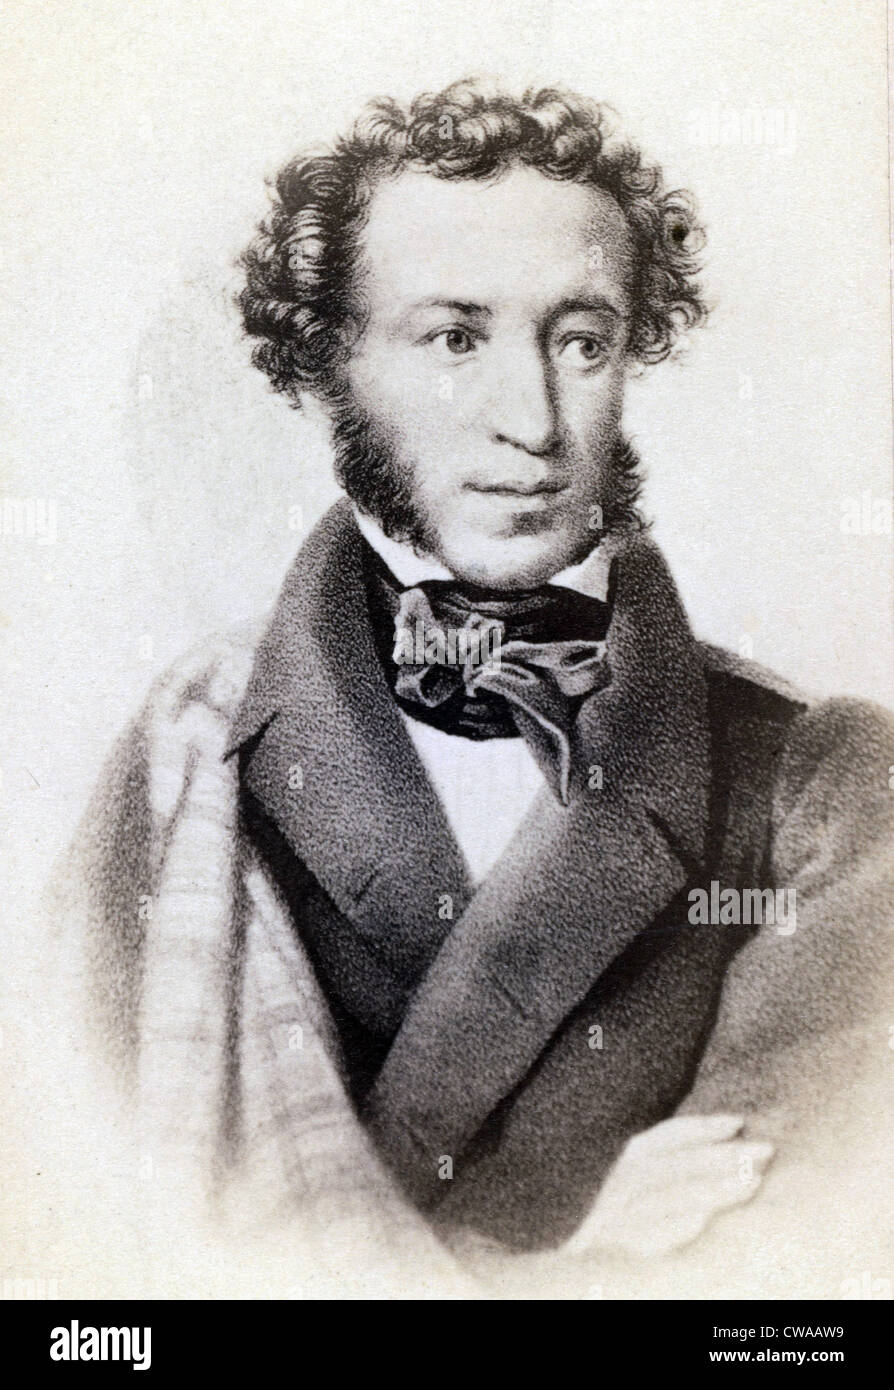 Aleksandr Sergeevich Pushkin (1799-1837) Russian poet and playwright, whose political themes resulted in periodic exiles during Stock Photo